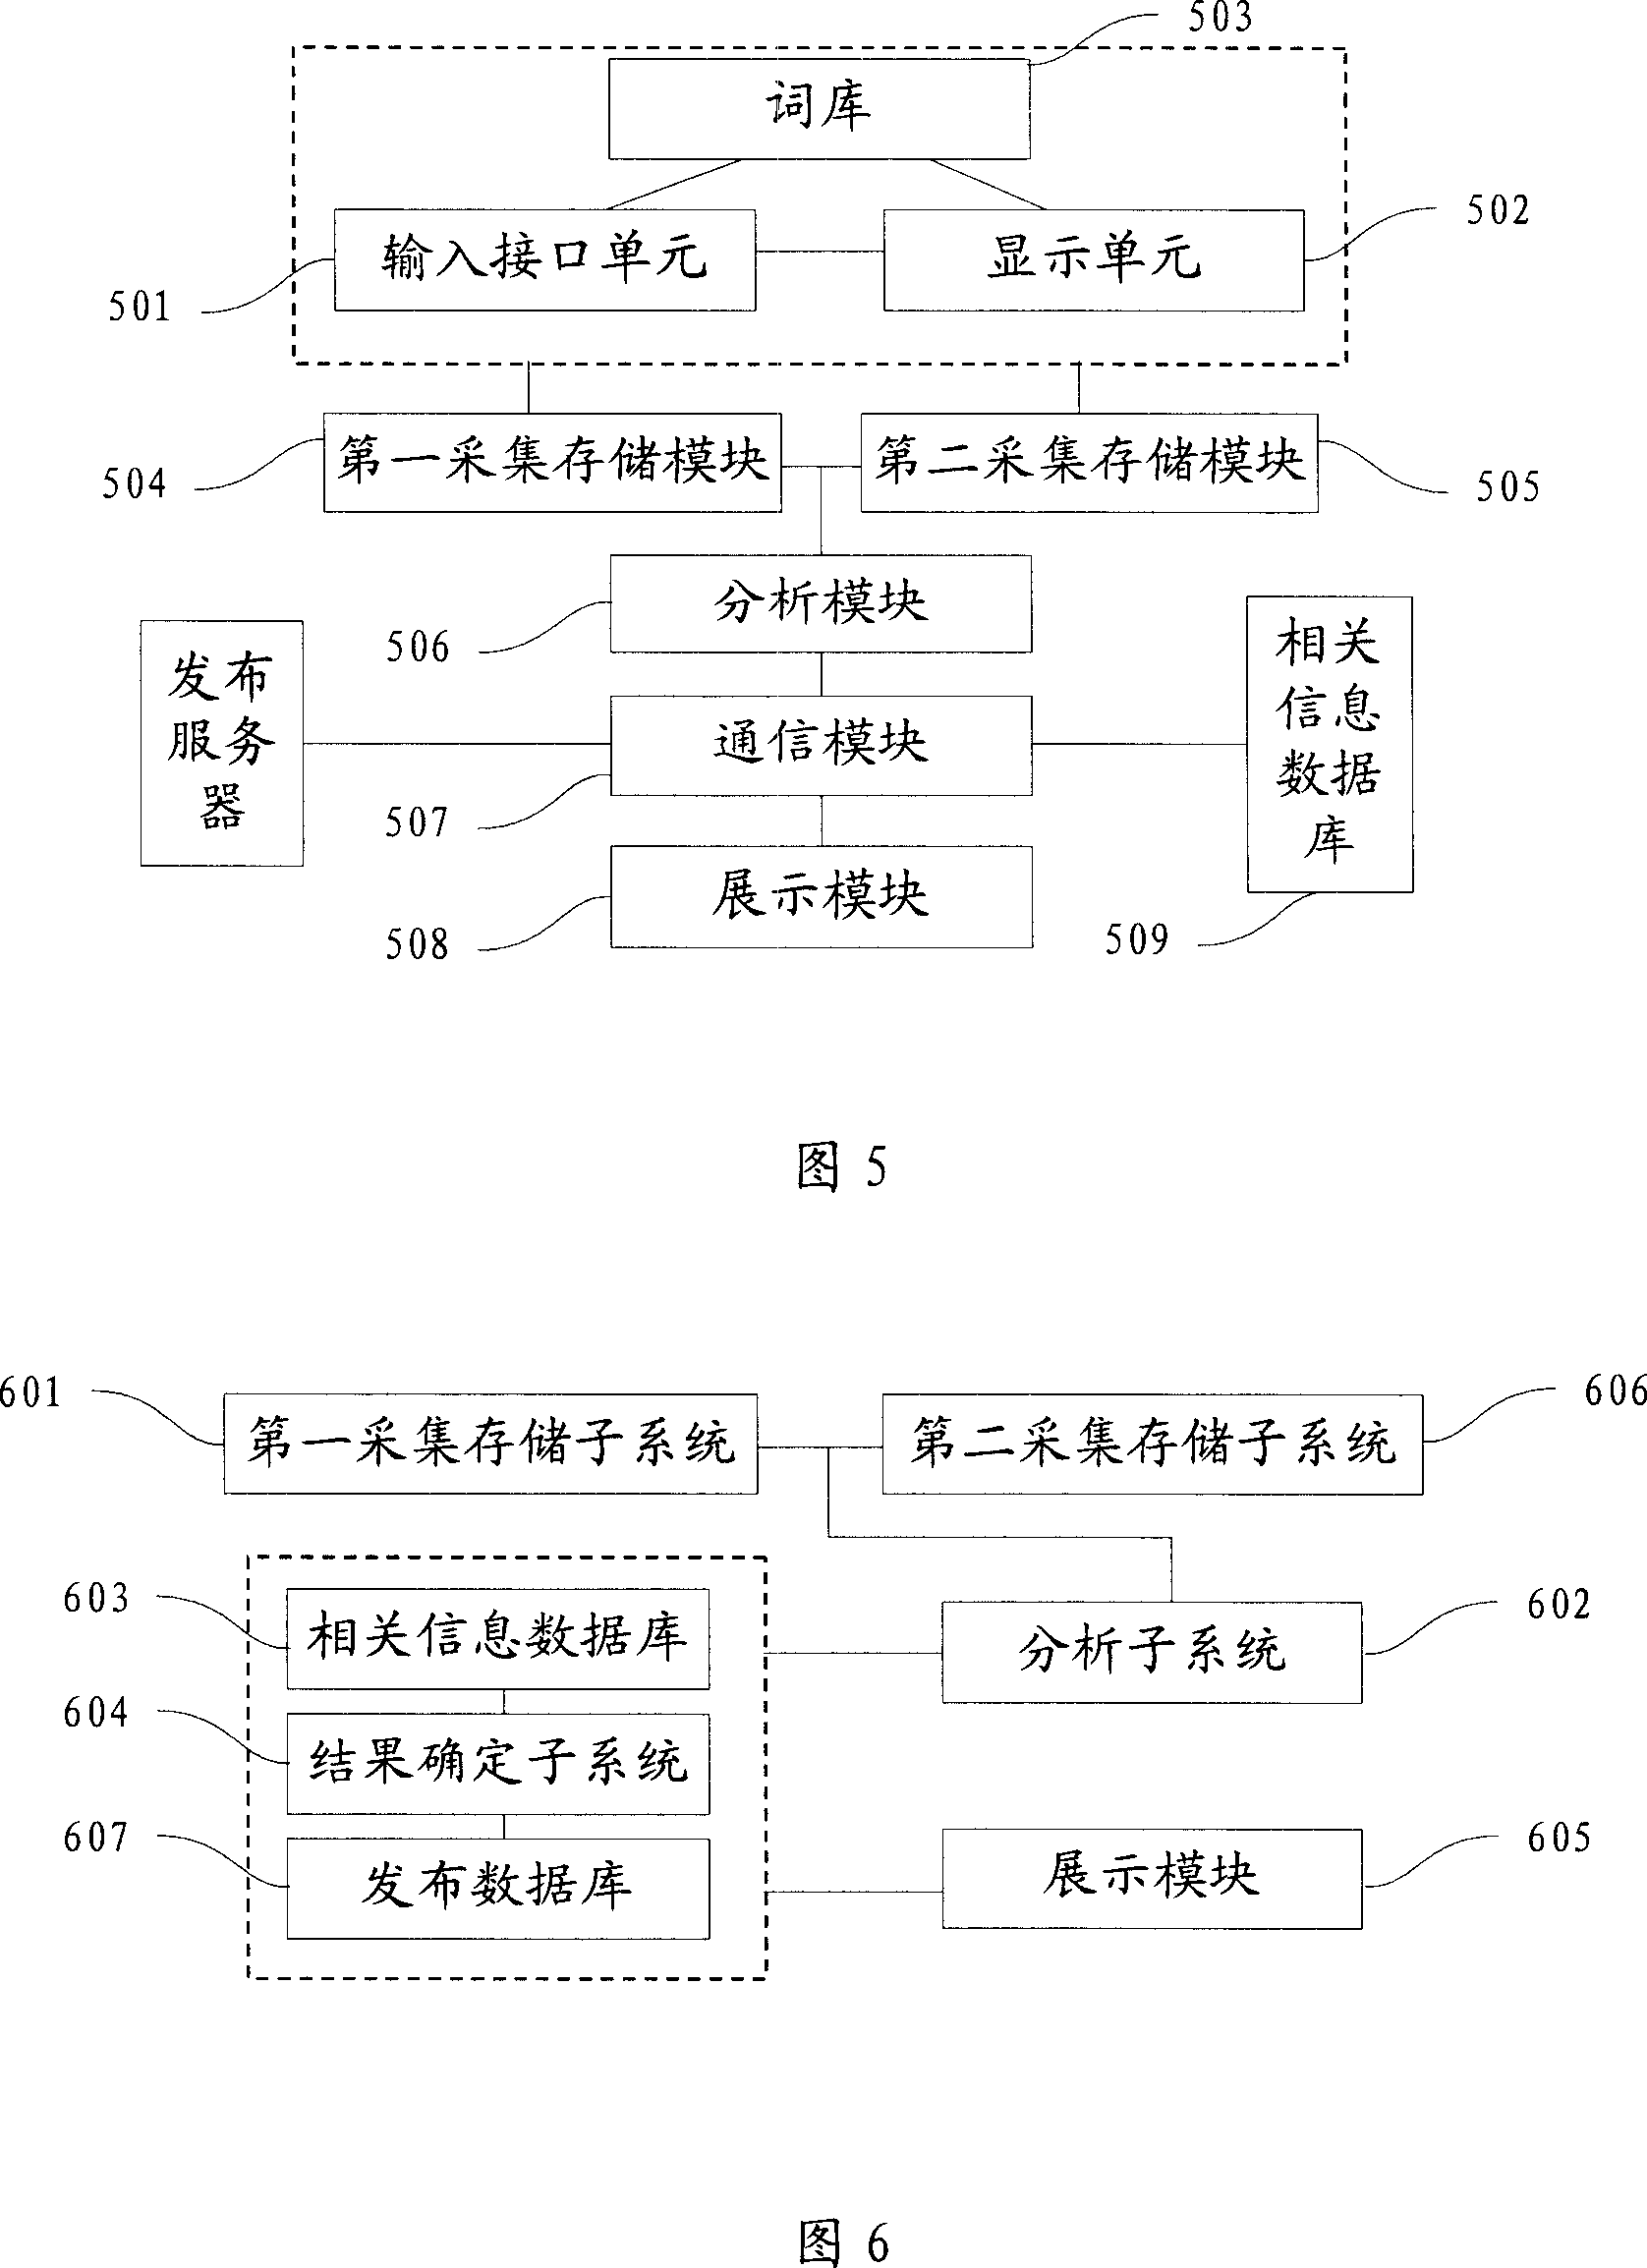 Method and system for distributing information directly associated with user